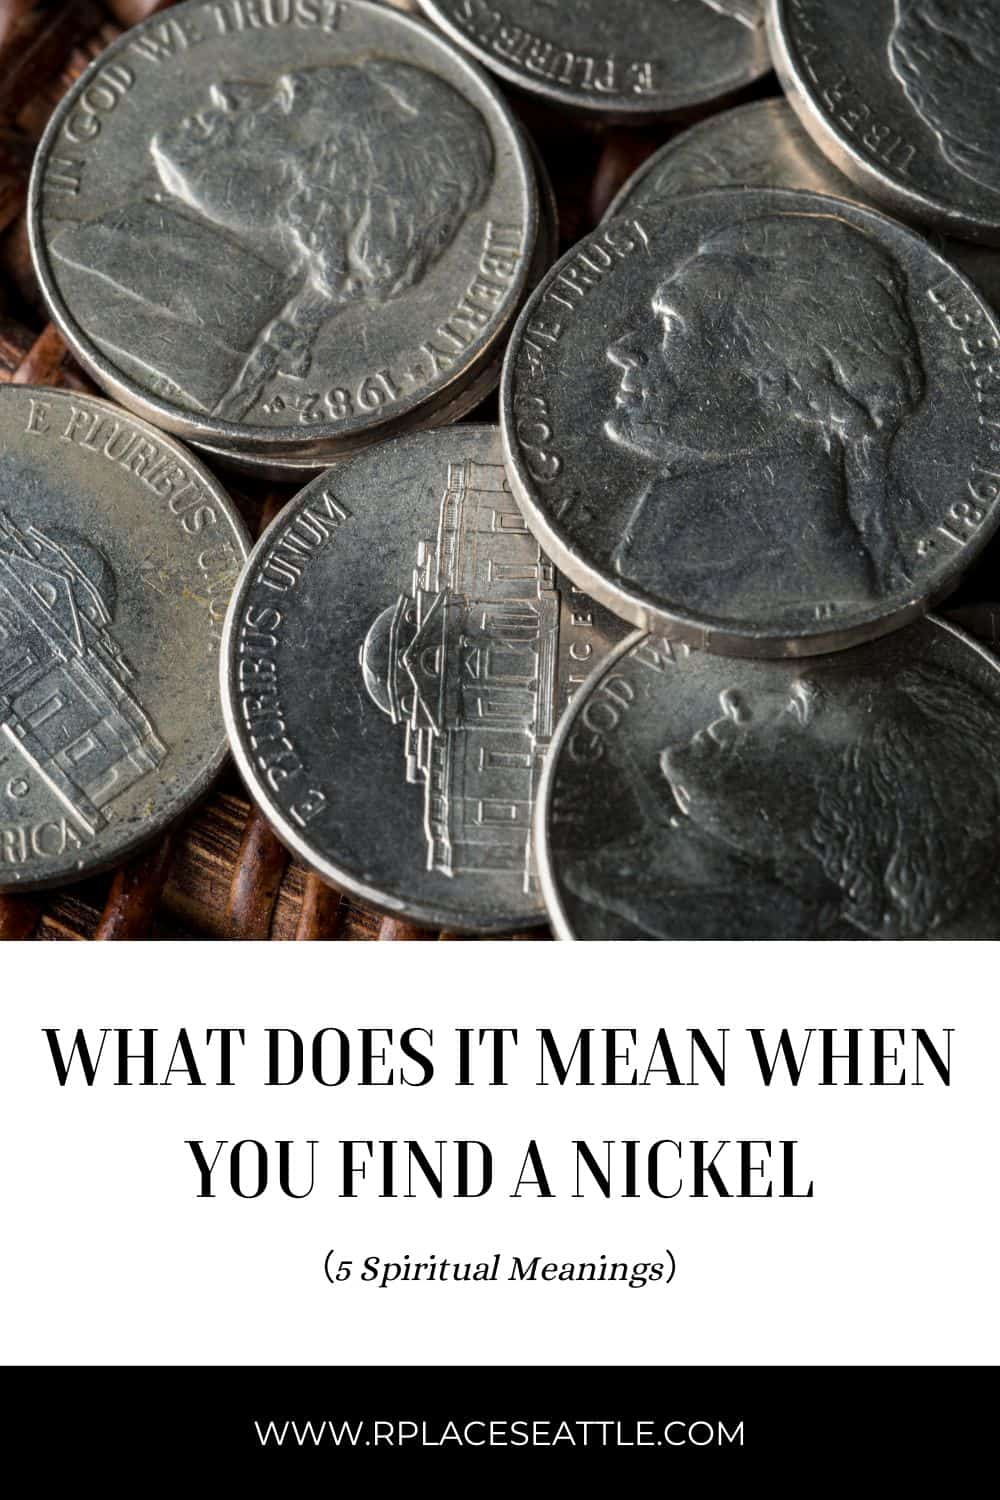 What Does It Mean When You Find A Nickel? (5 Spiritual Meanings)